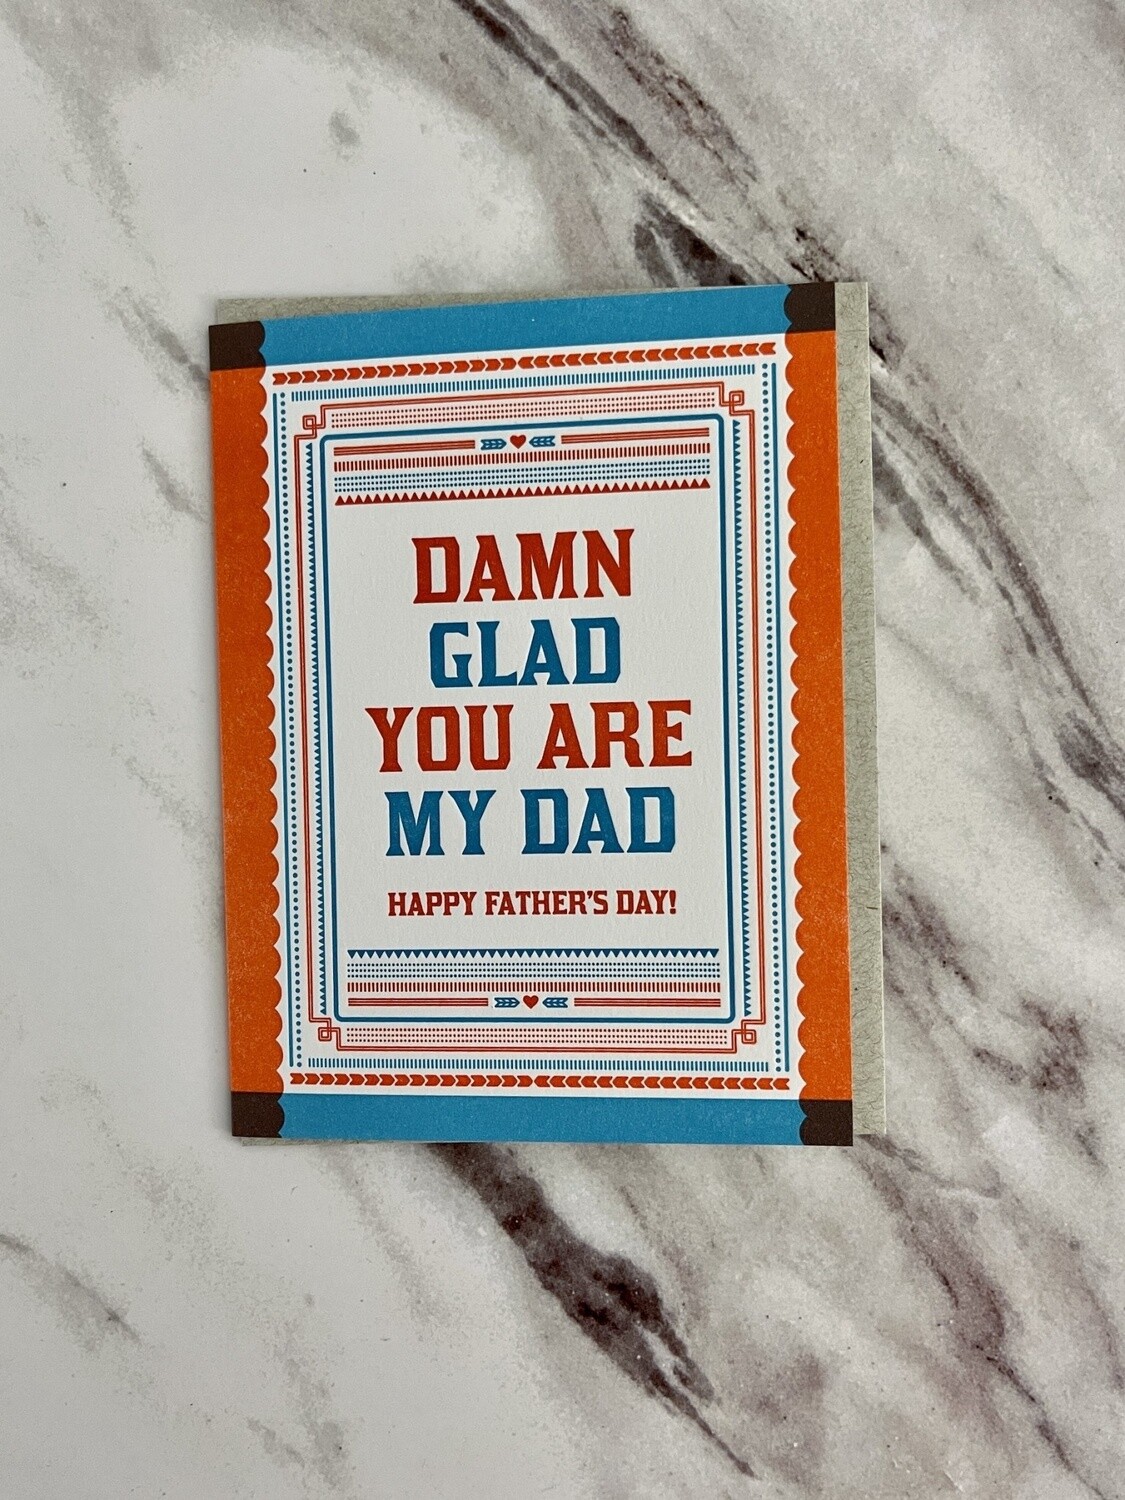 Damn Glad You Are My Dad Letterpress Card